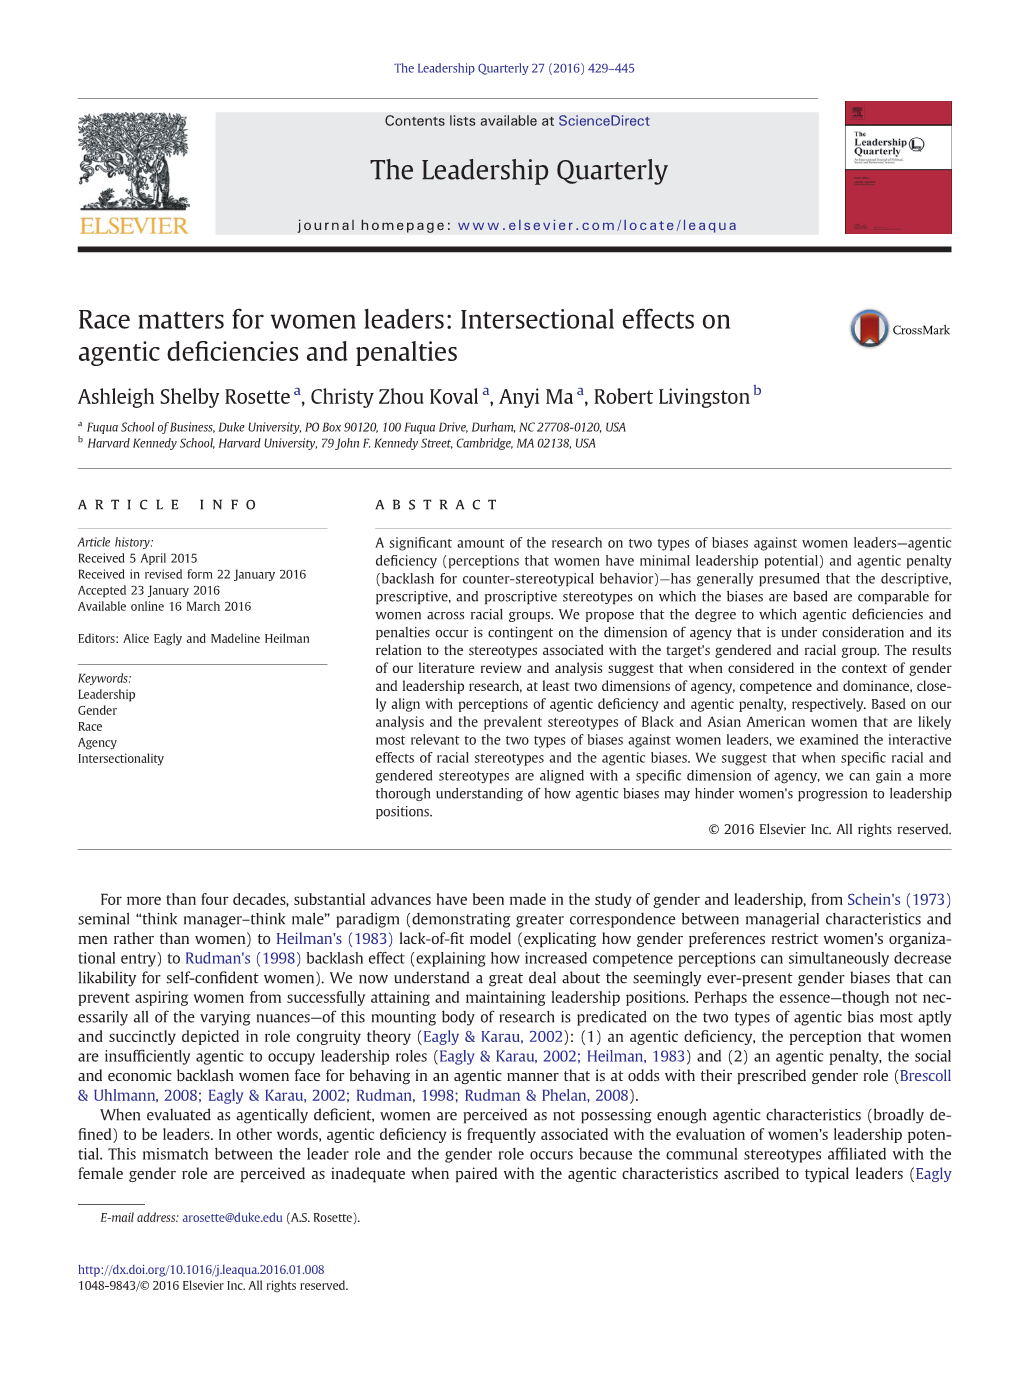 Race Matters for Women Leaders: Intersectional Effects on Agentic Deﬁciencies and Penalties